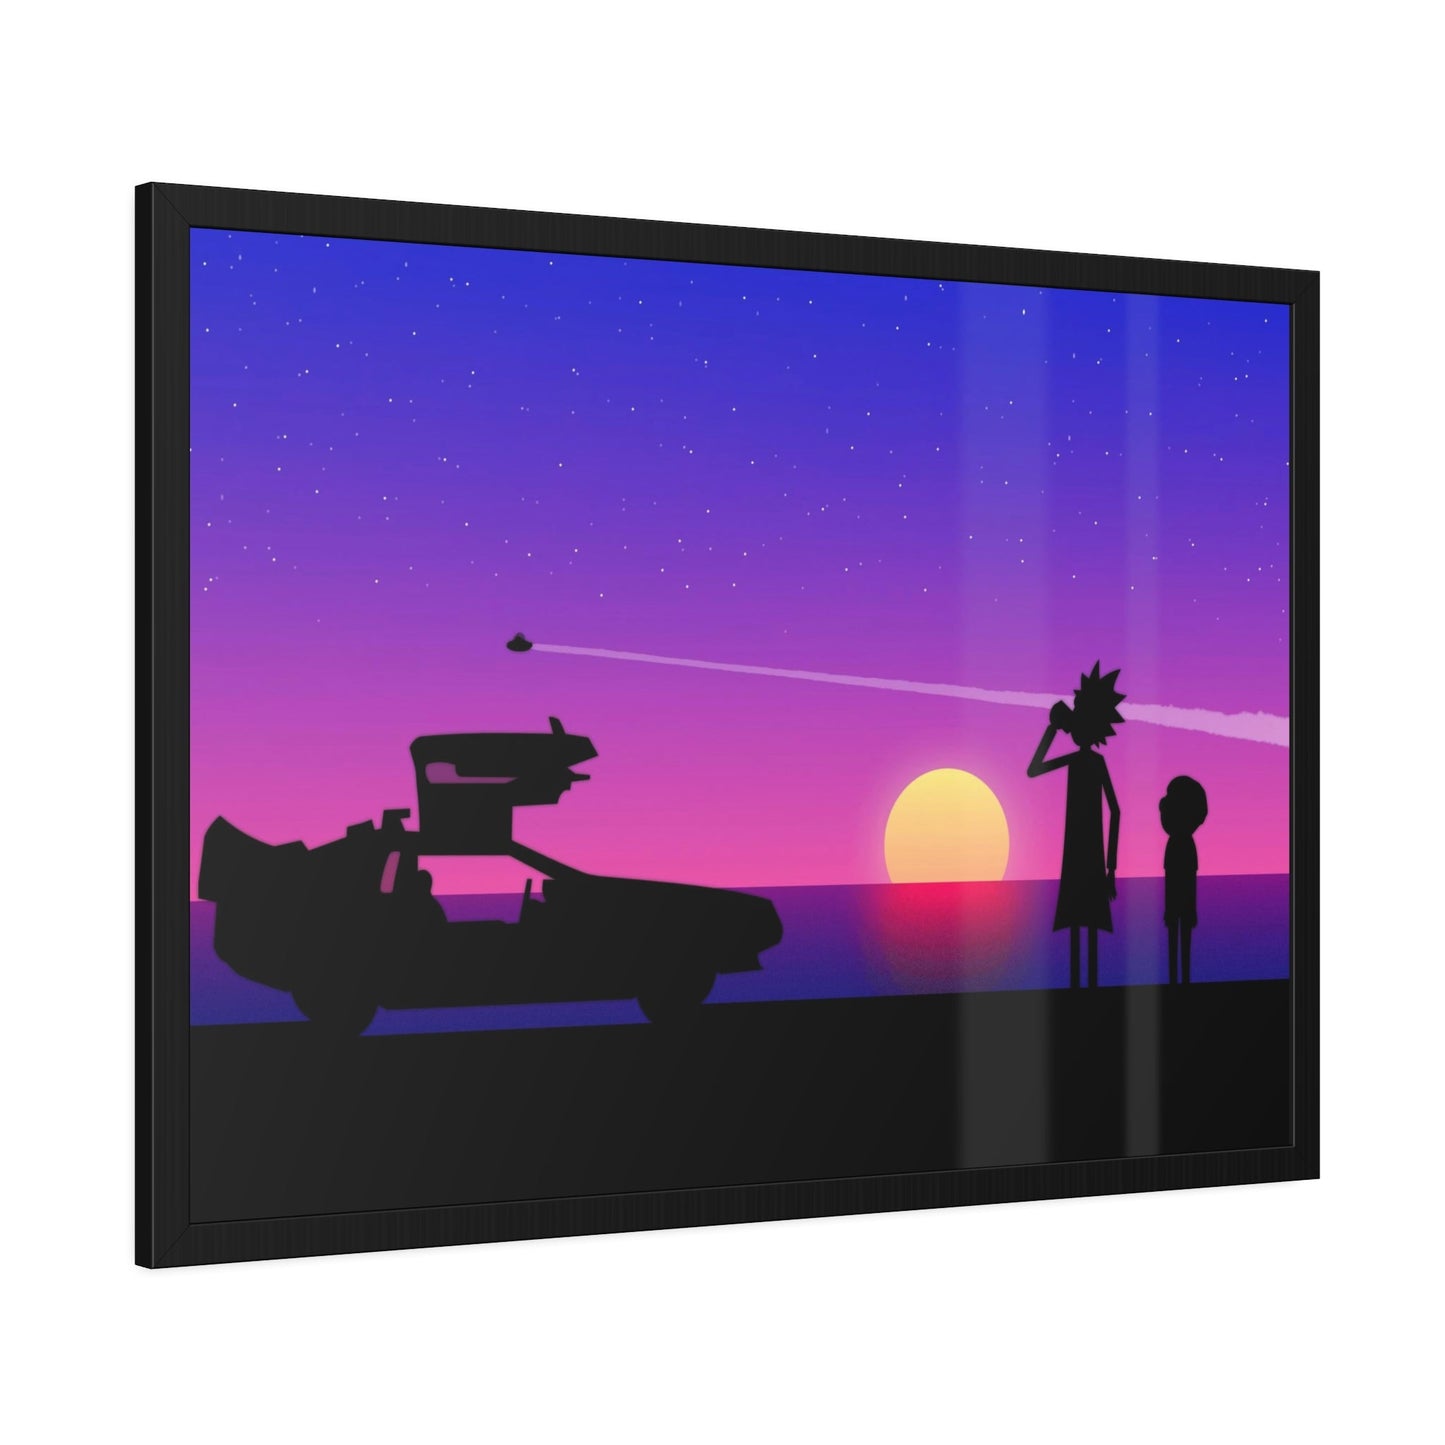 Out-of-This-World Creativity: Framed Canvas Rick and Morty Art for Wall Decor